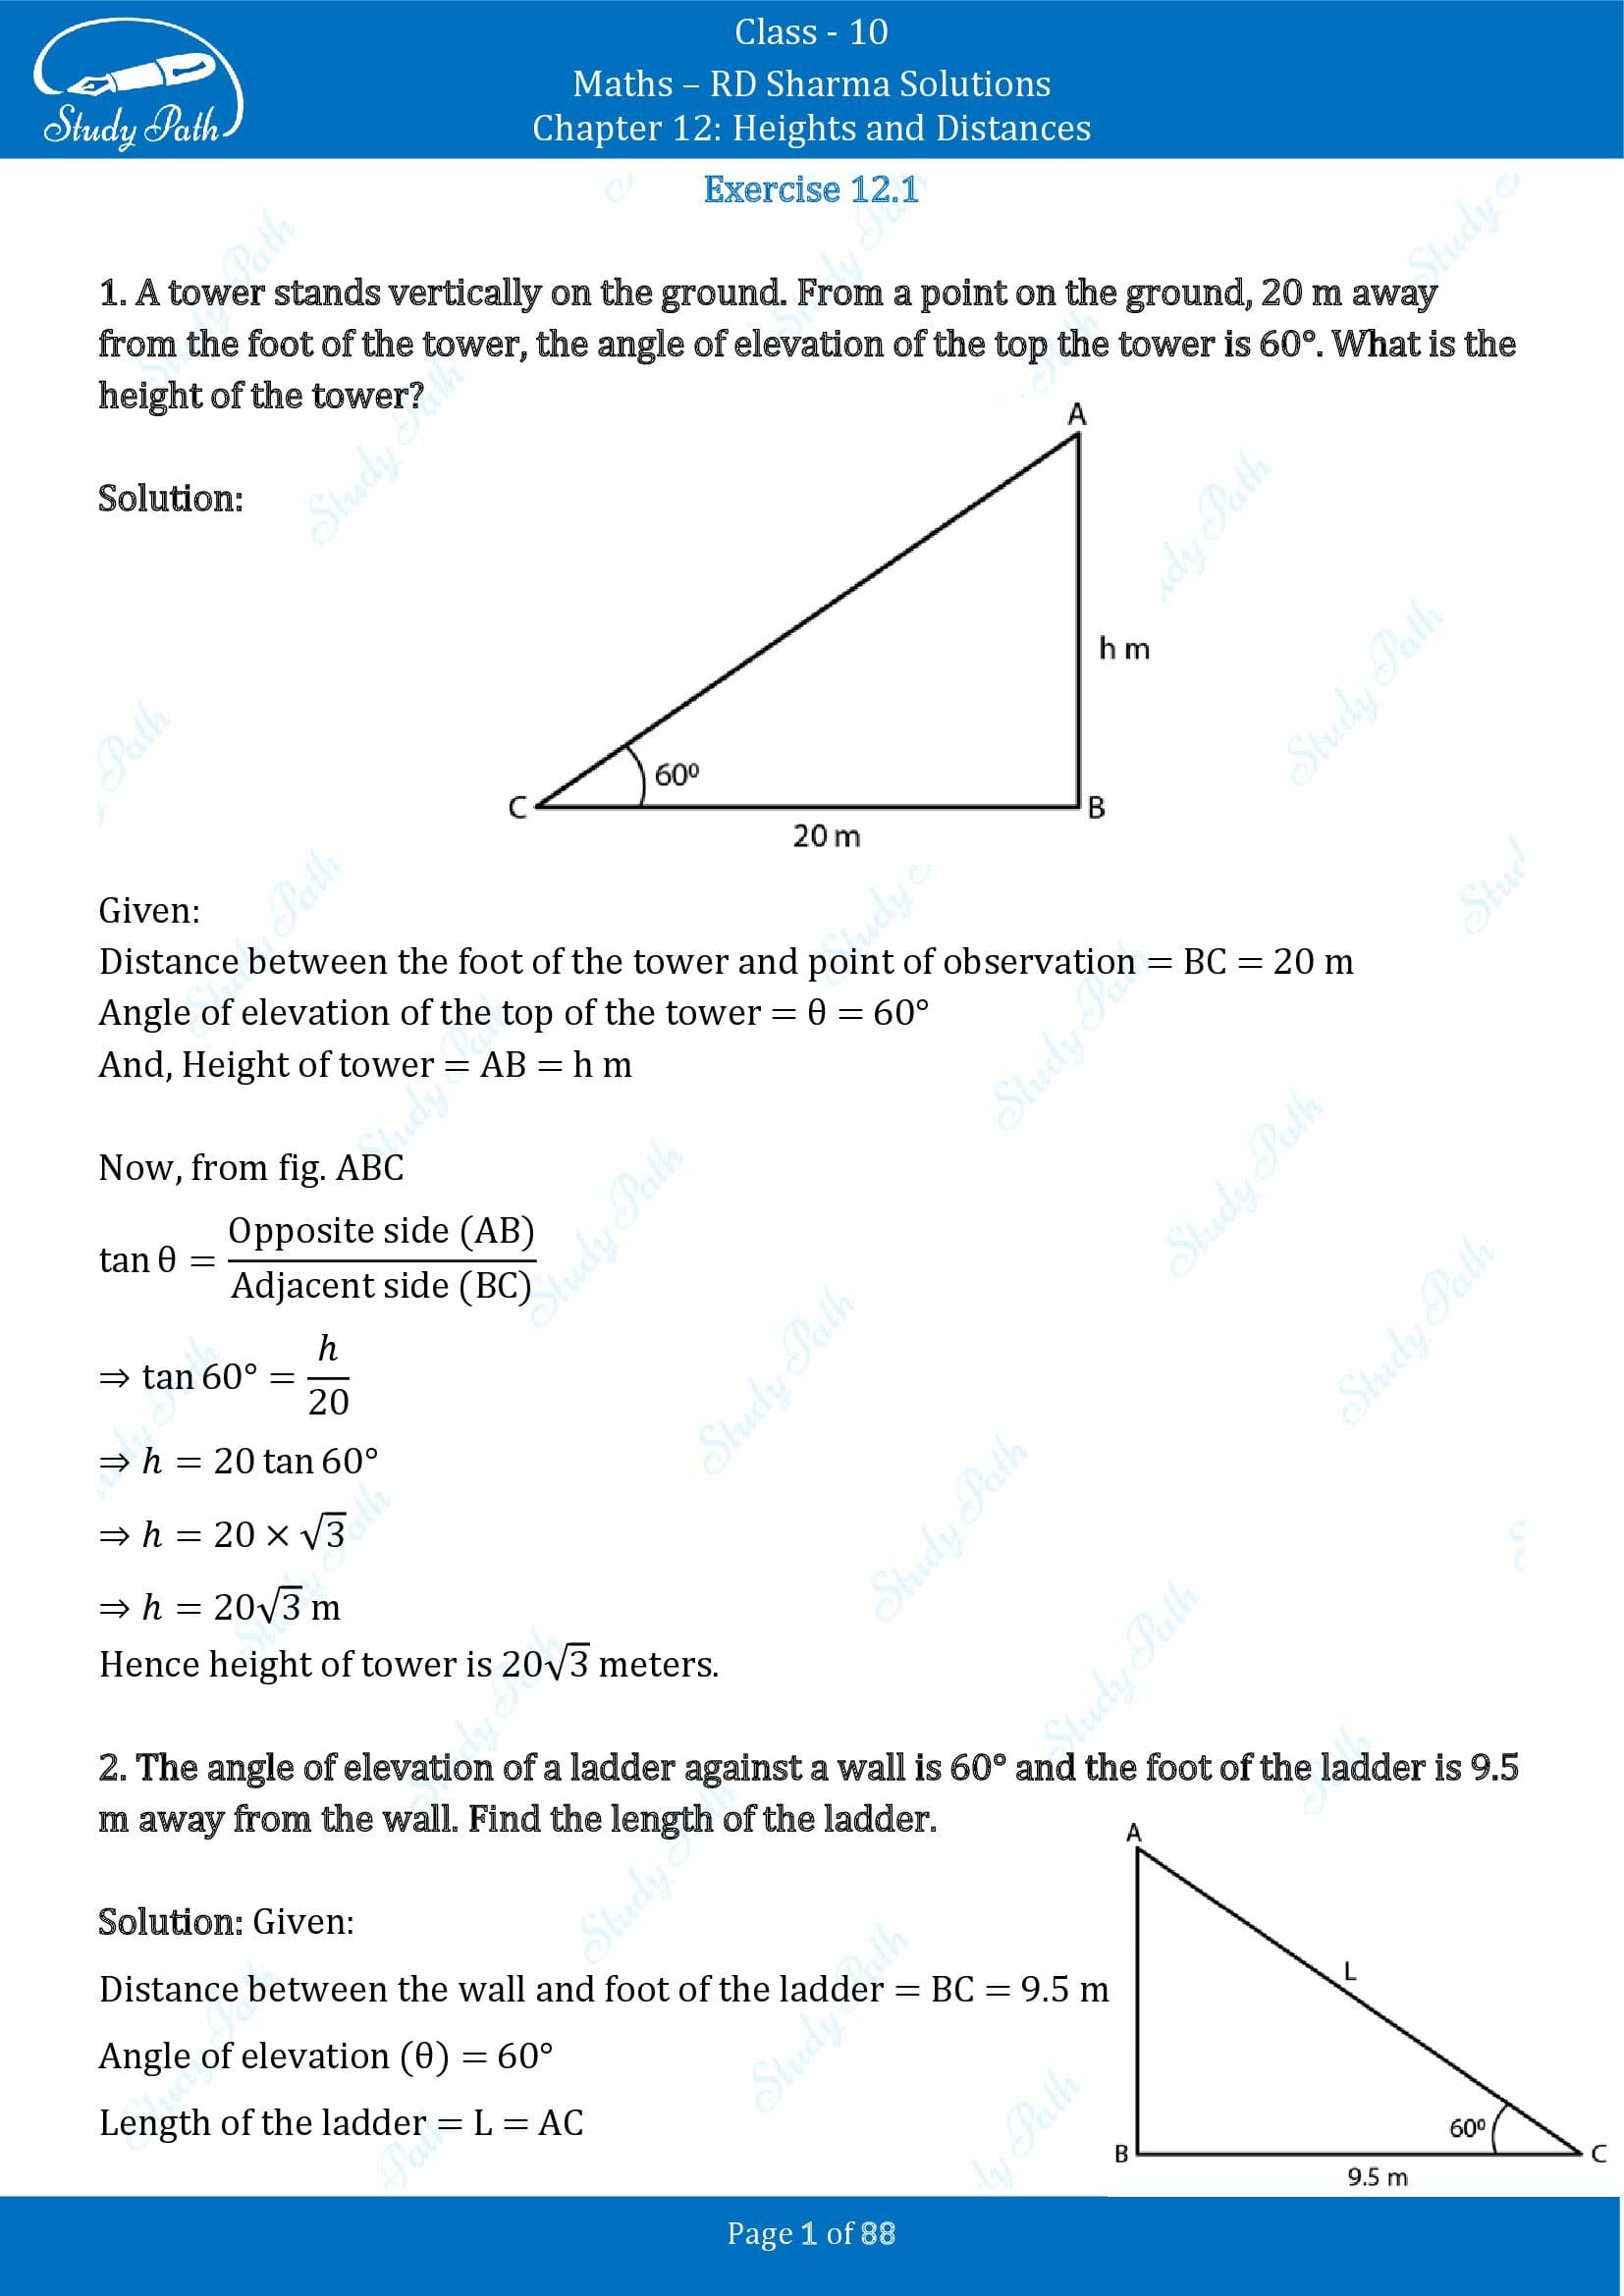 RD Sharma Solutions Class 10 Chapter 12 Heights and Distances Exercise 12.1 00001